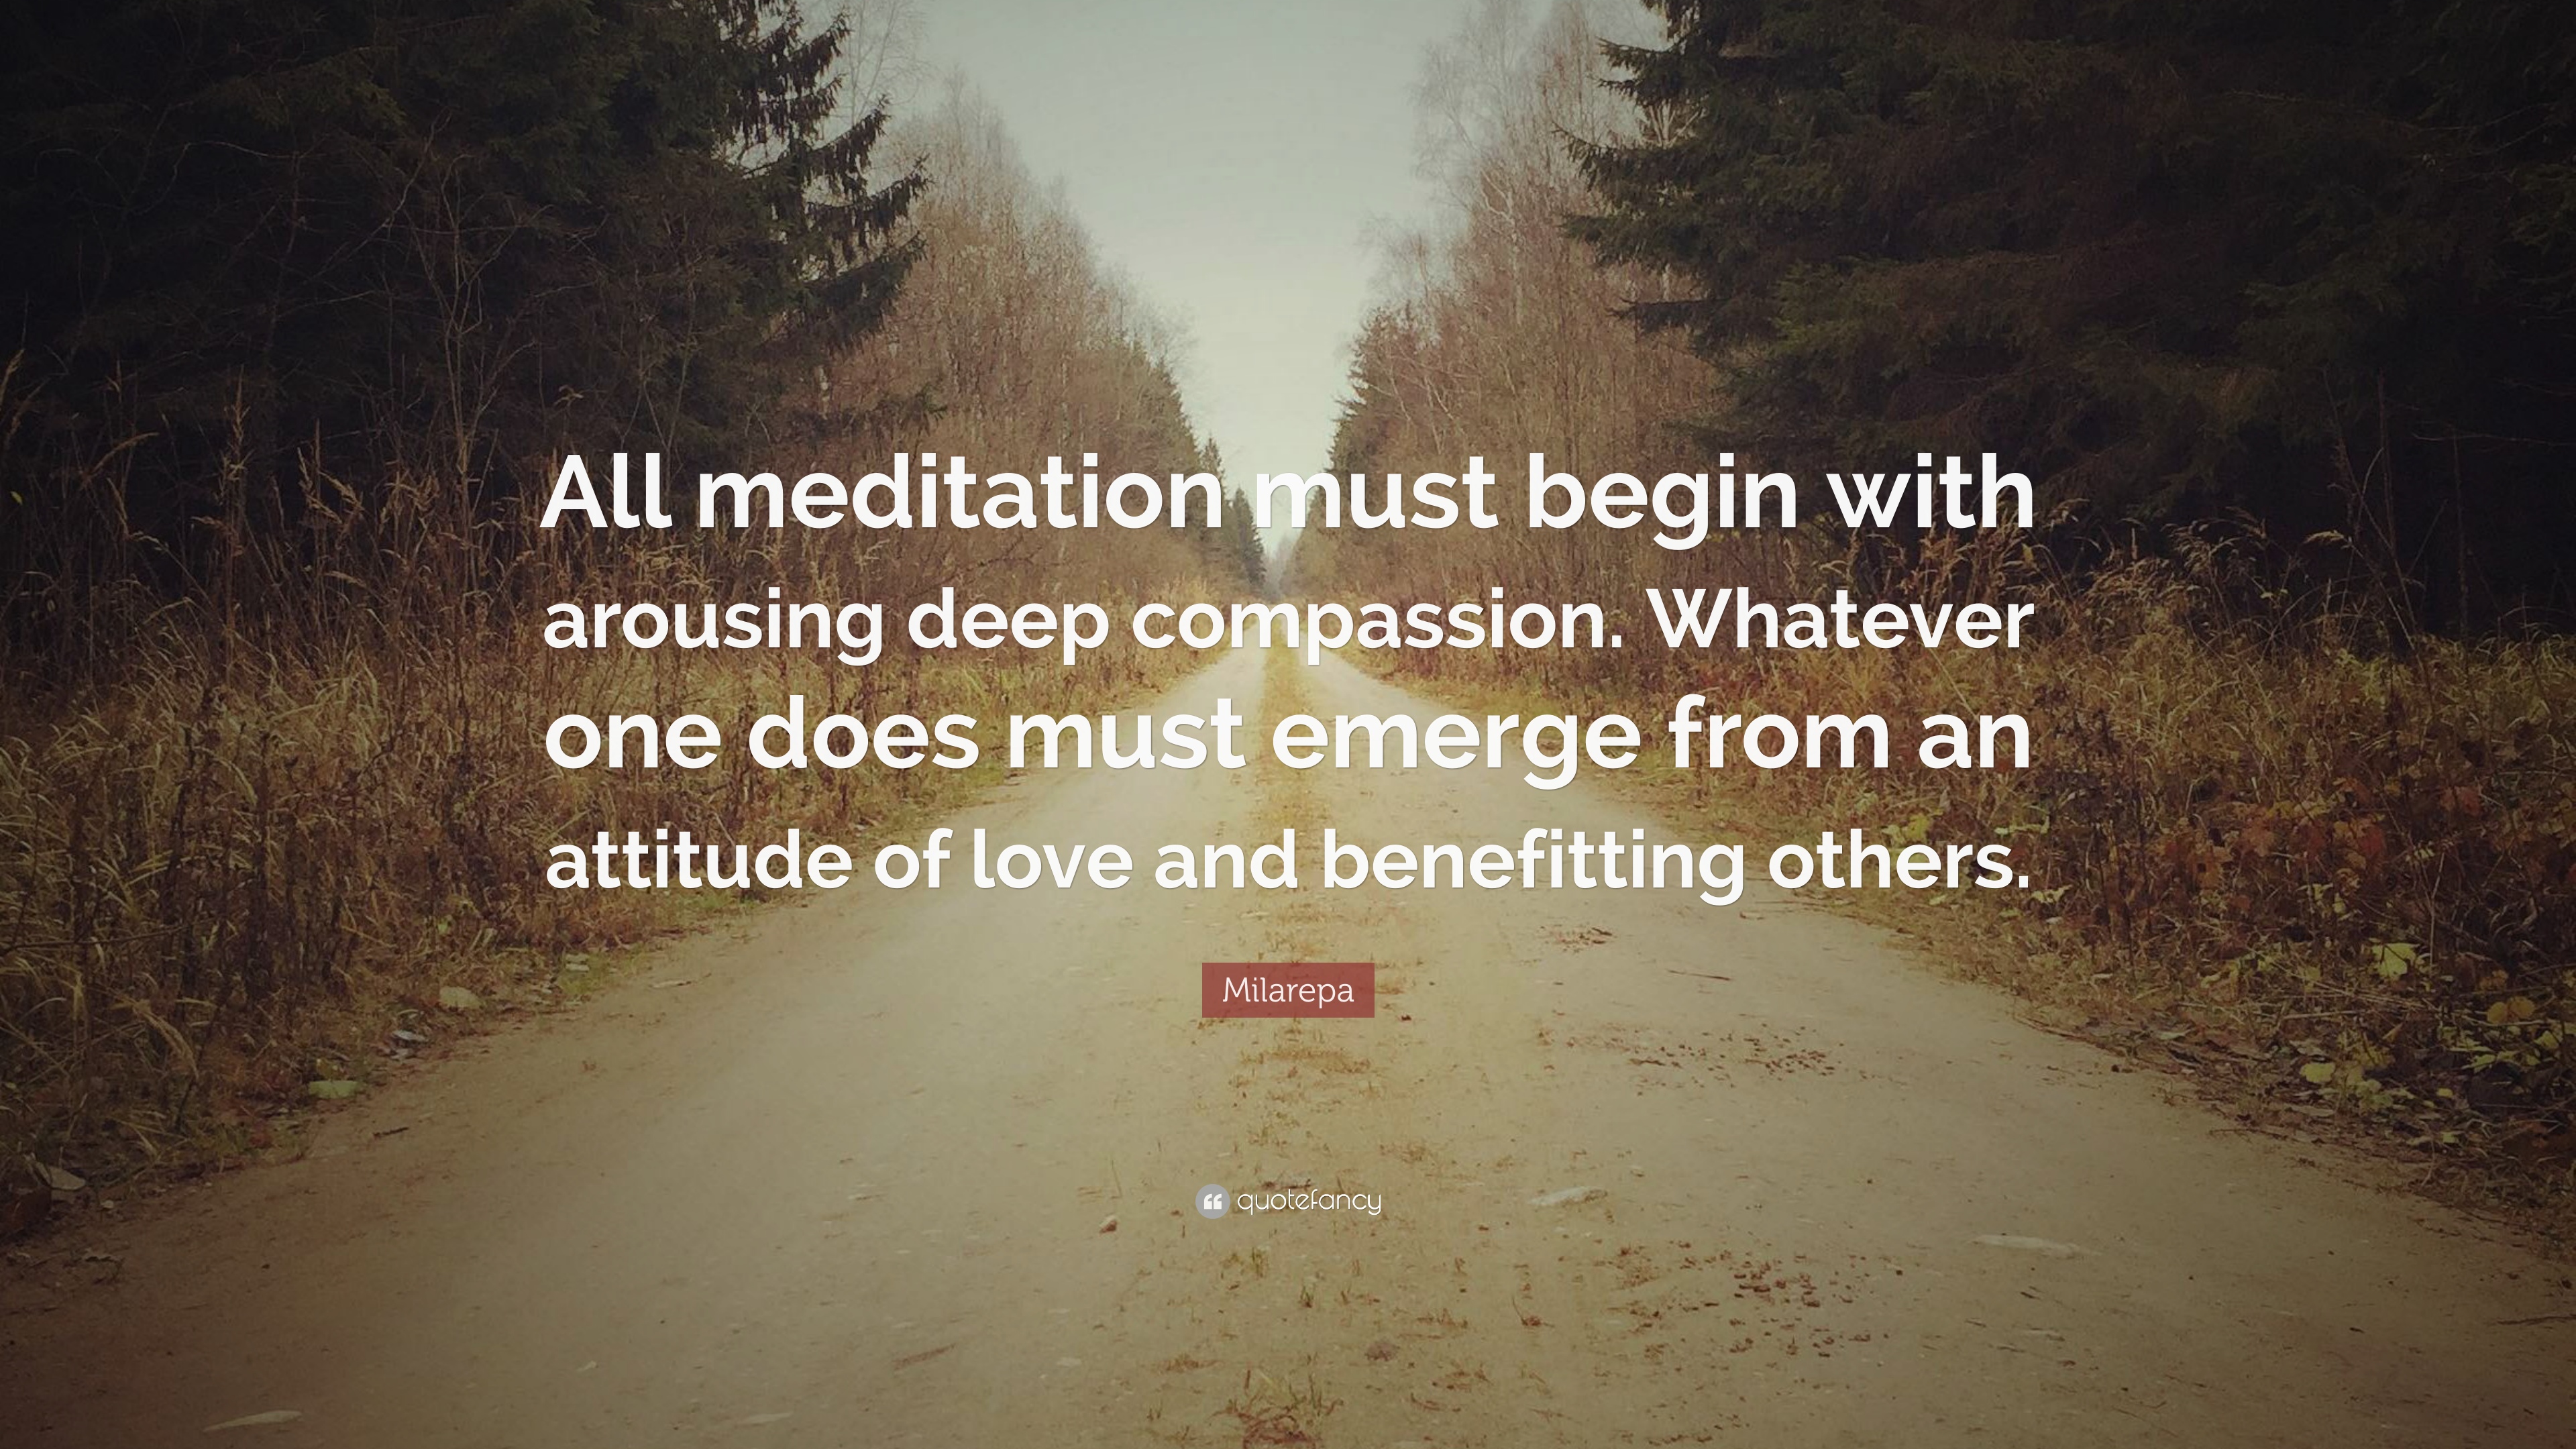 Milarepa Quote: “All meditation must begin with arousing deep